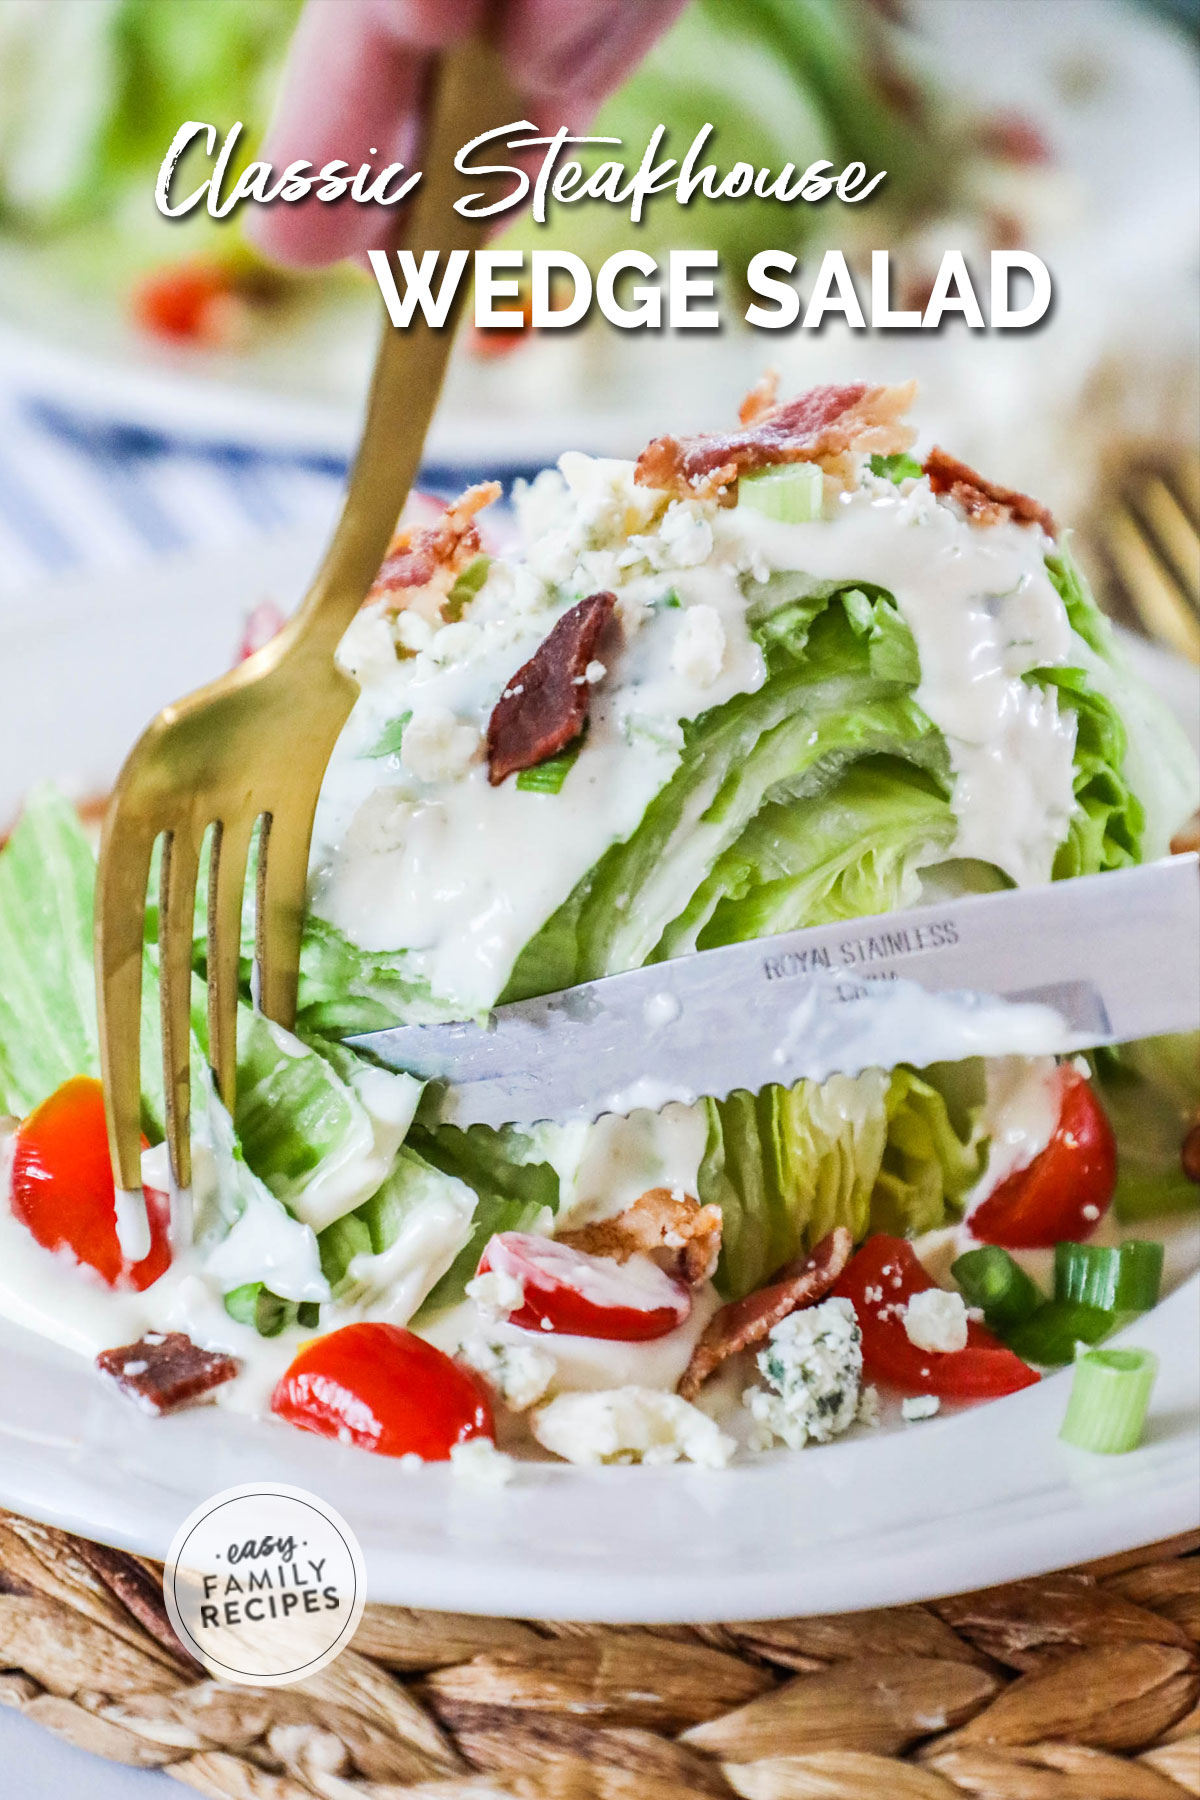 Fork and knife cutting into wedge salad topped with dressing, tomatoes, bacon, and blue cheese on large white plate with another serving behind.